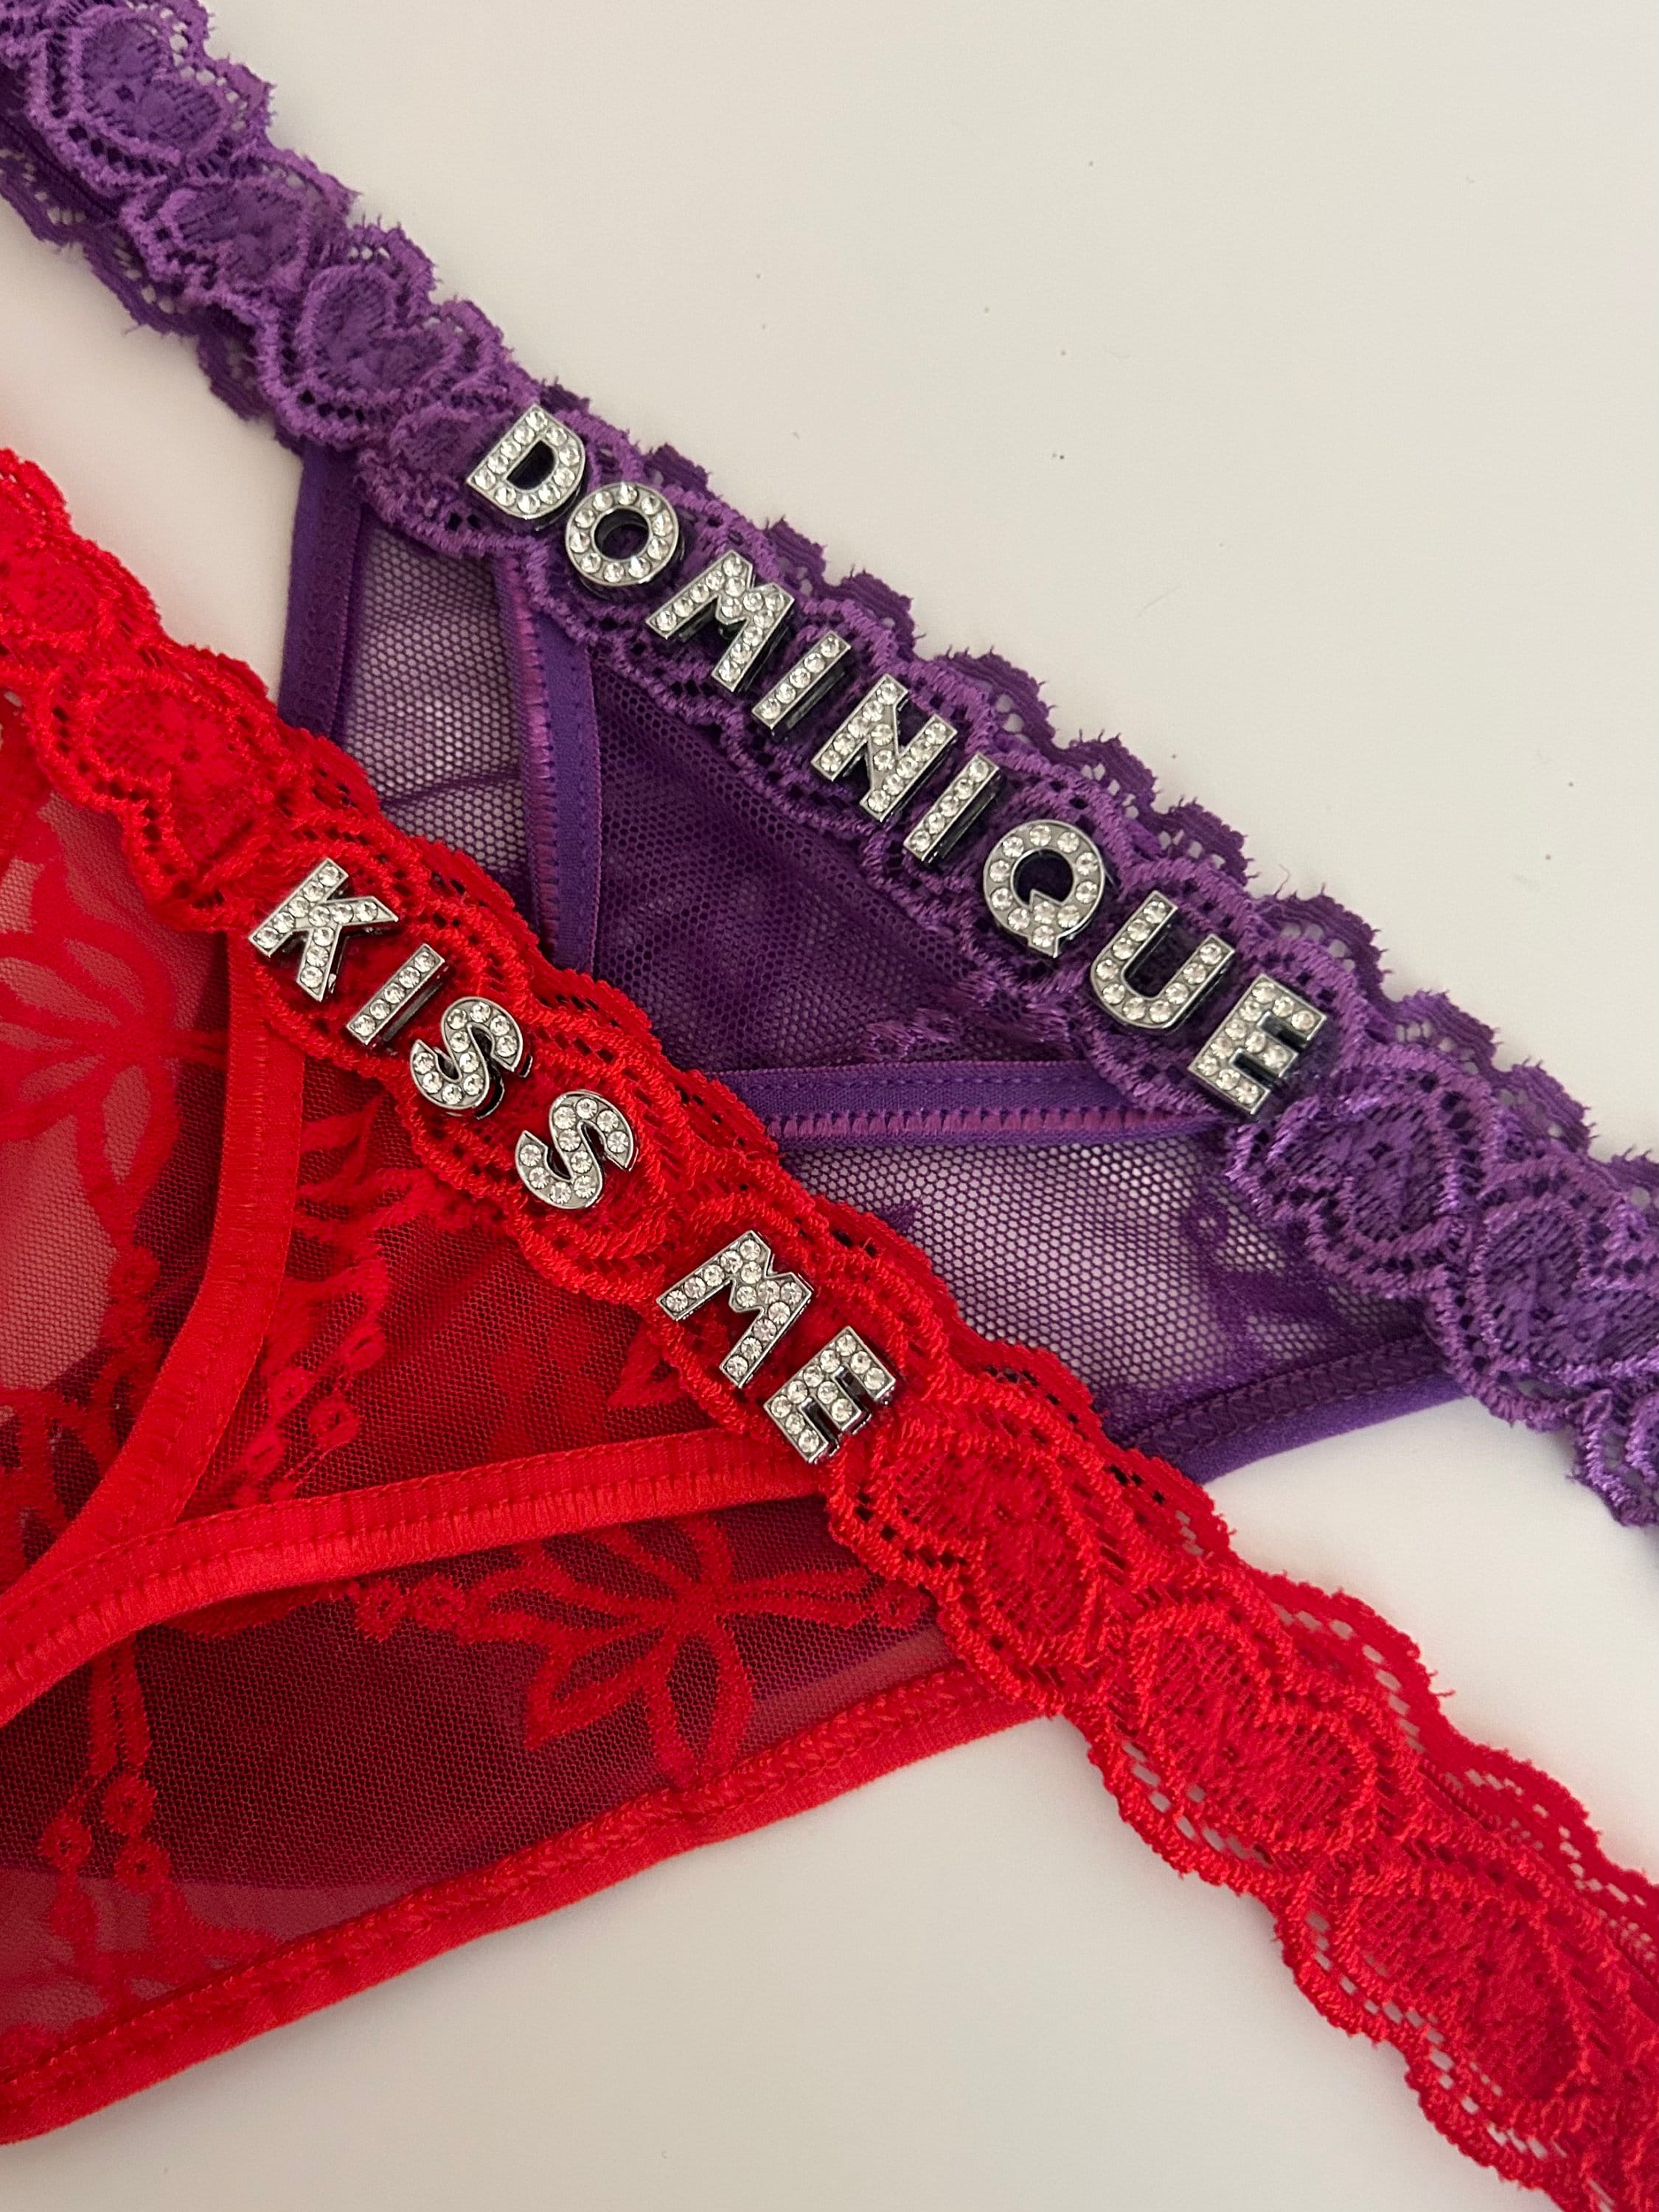 Personalized Name Thong: A Unique Surprise for Your Partner